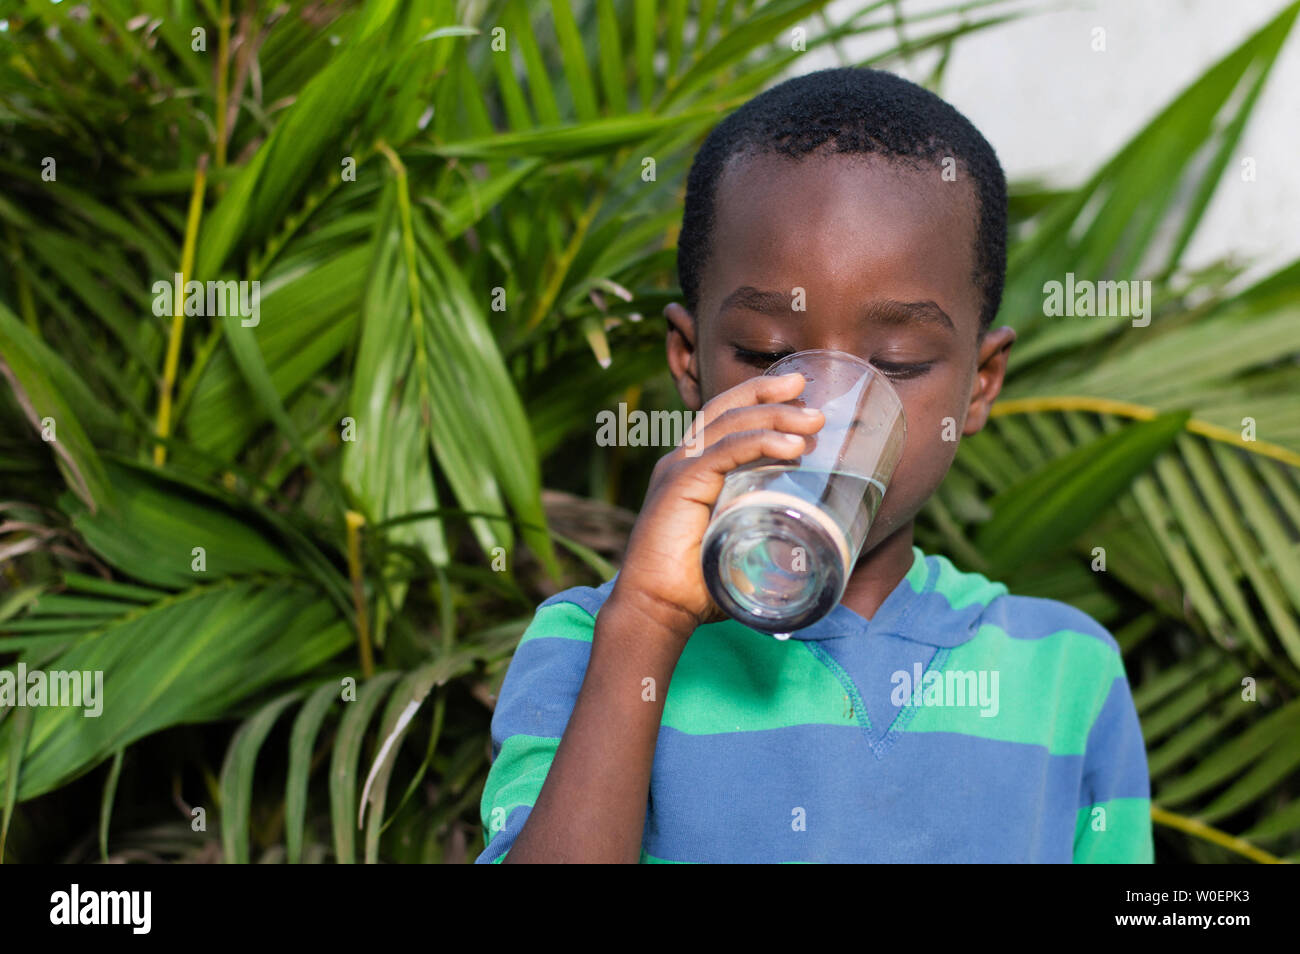 Boy drinking mineral water in a glass. Stock Photo